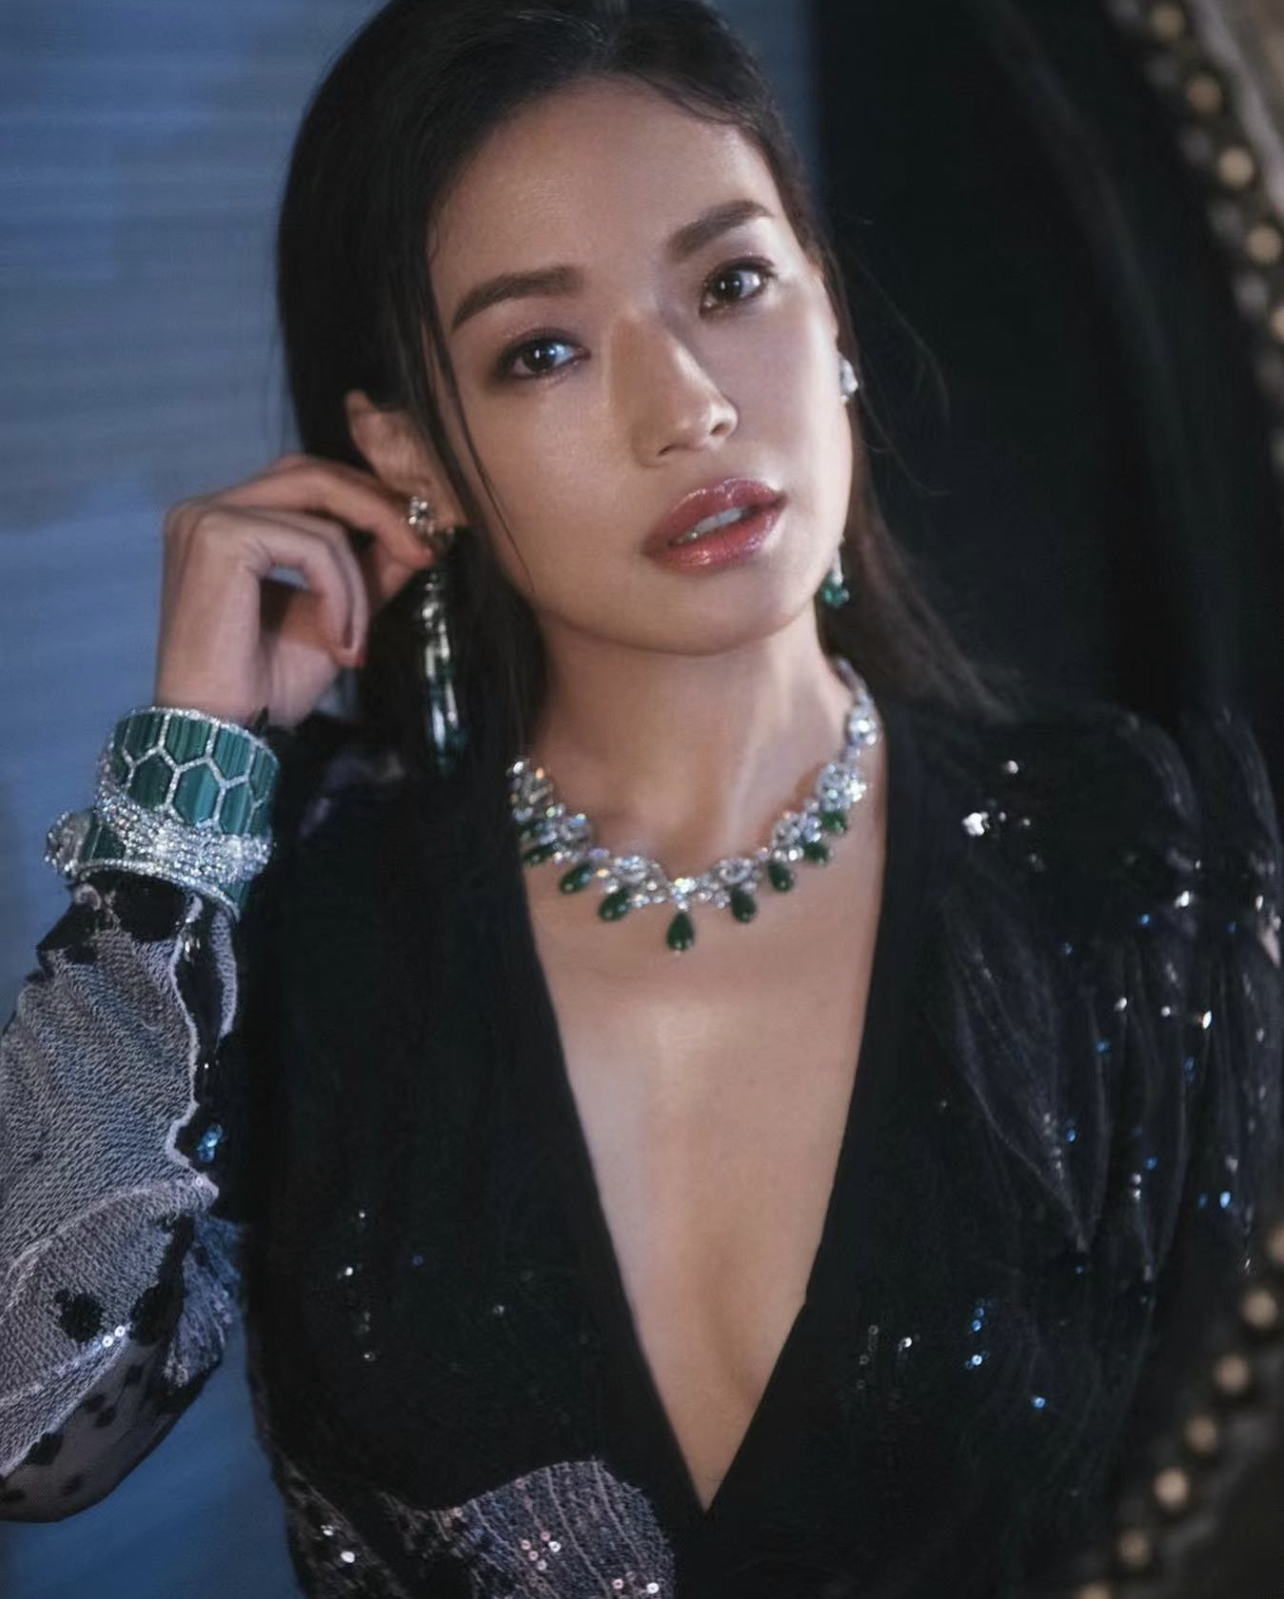 What on earth could Shu Qi have done?